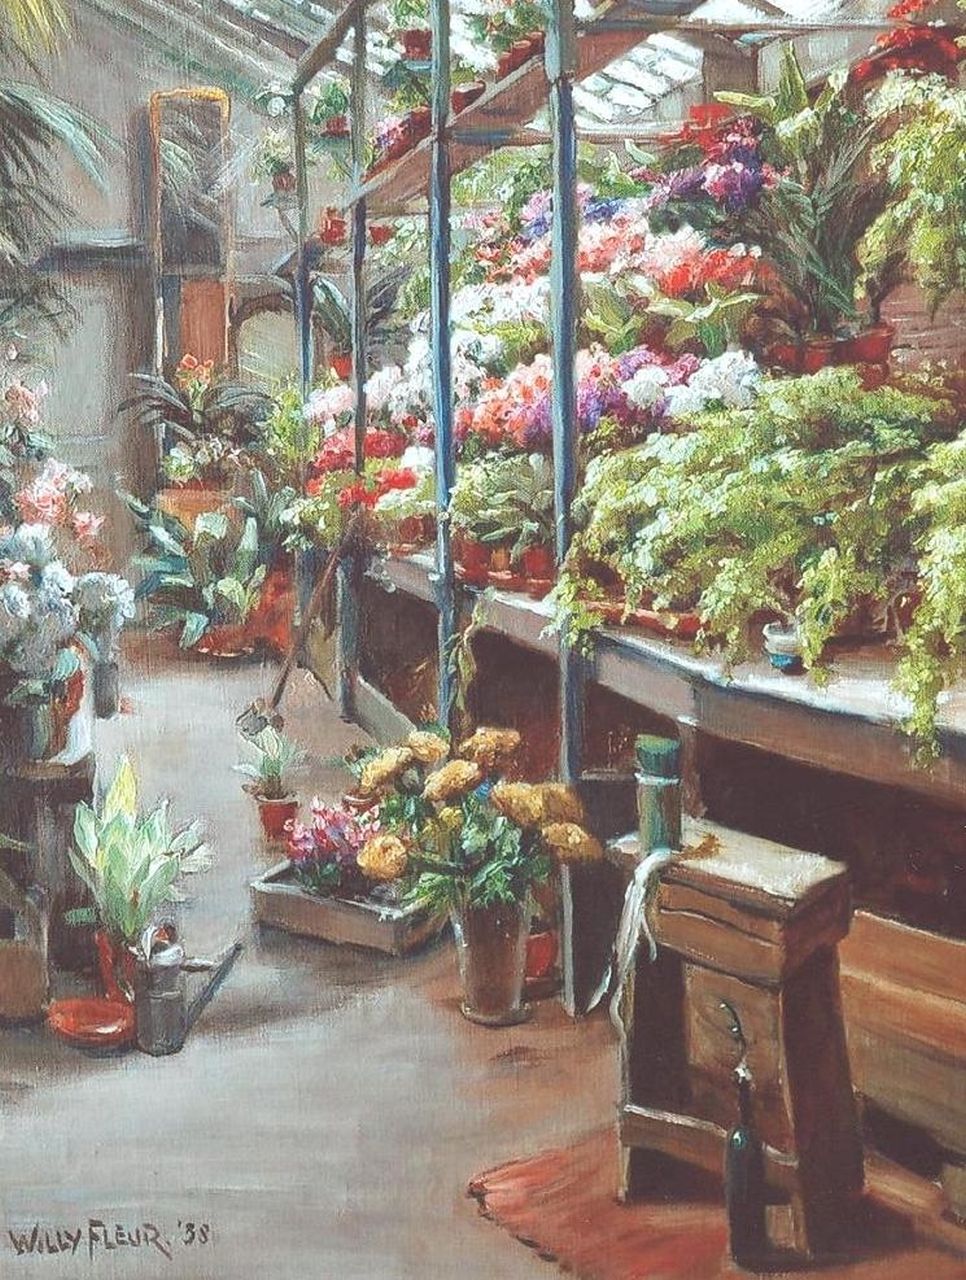 Fleur J.W.  | Johan Willem 'Willy' Fleur, Interior of a greenhouse, oil on canvas 49.9 x 40.3 cm, signed l.l. and dated '38